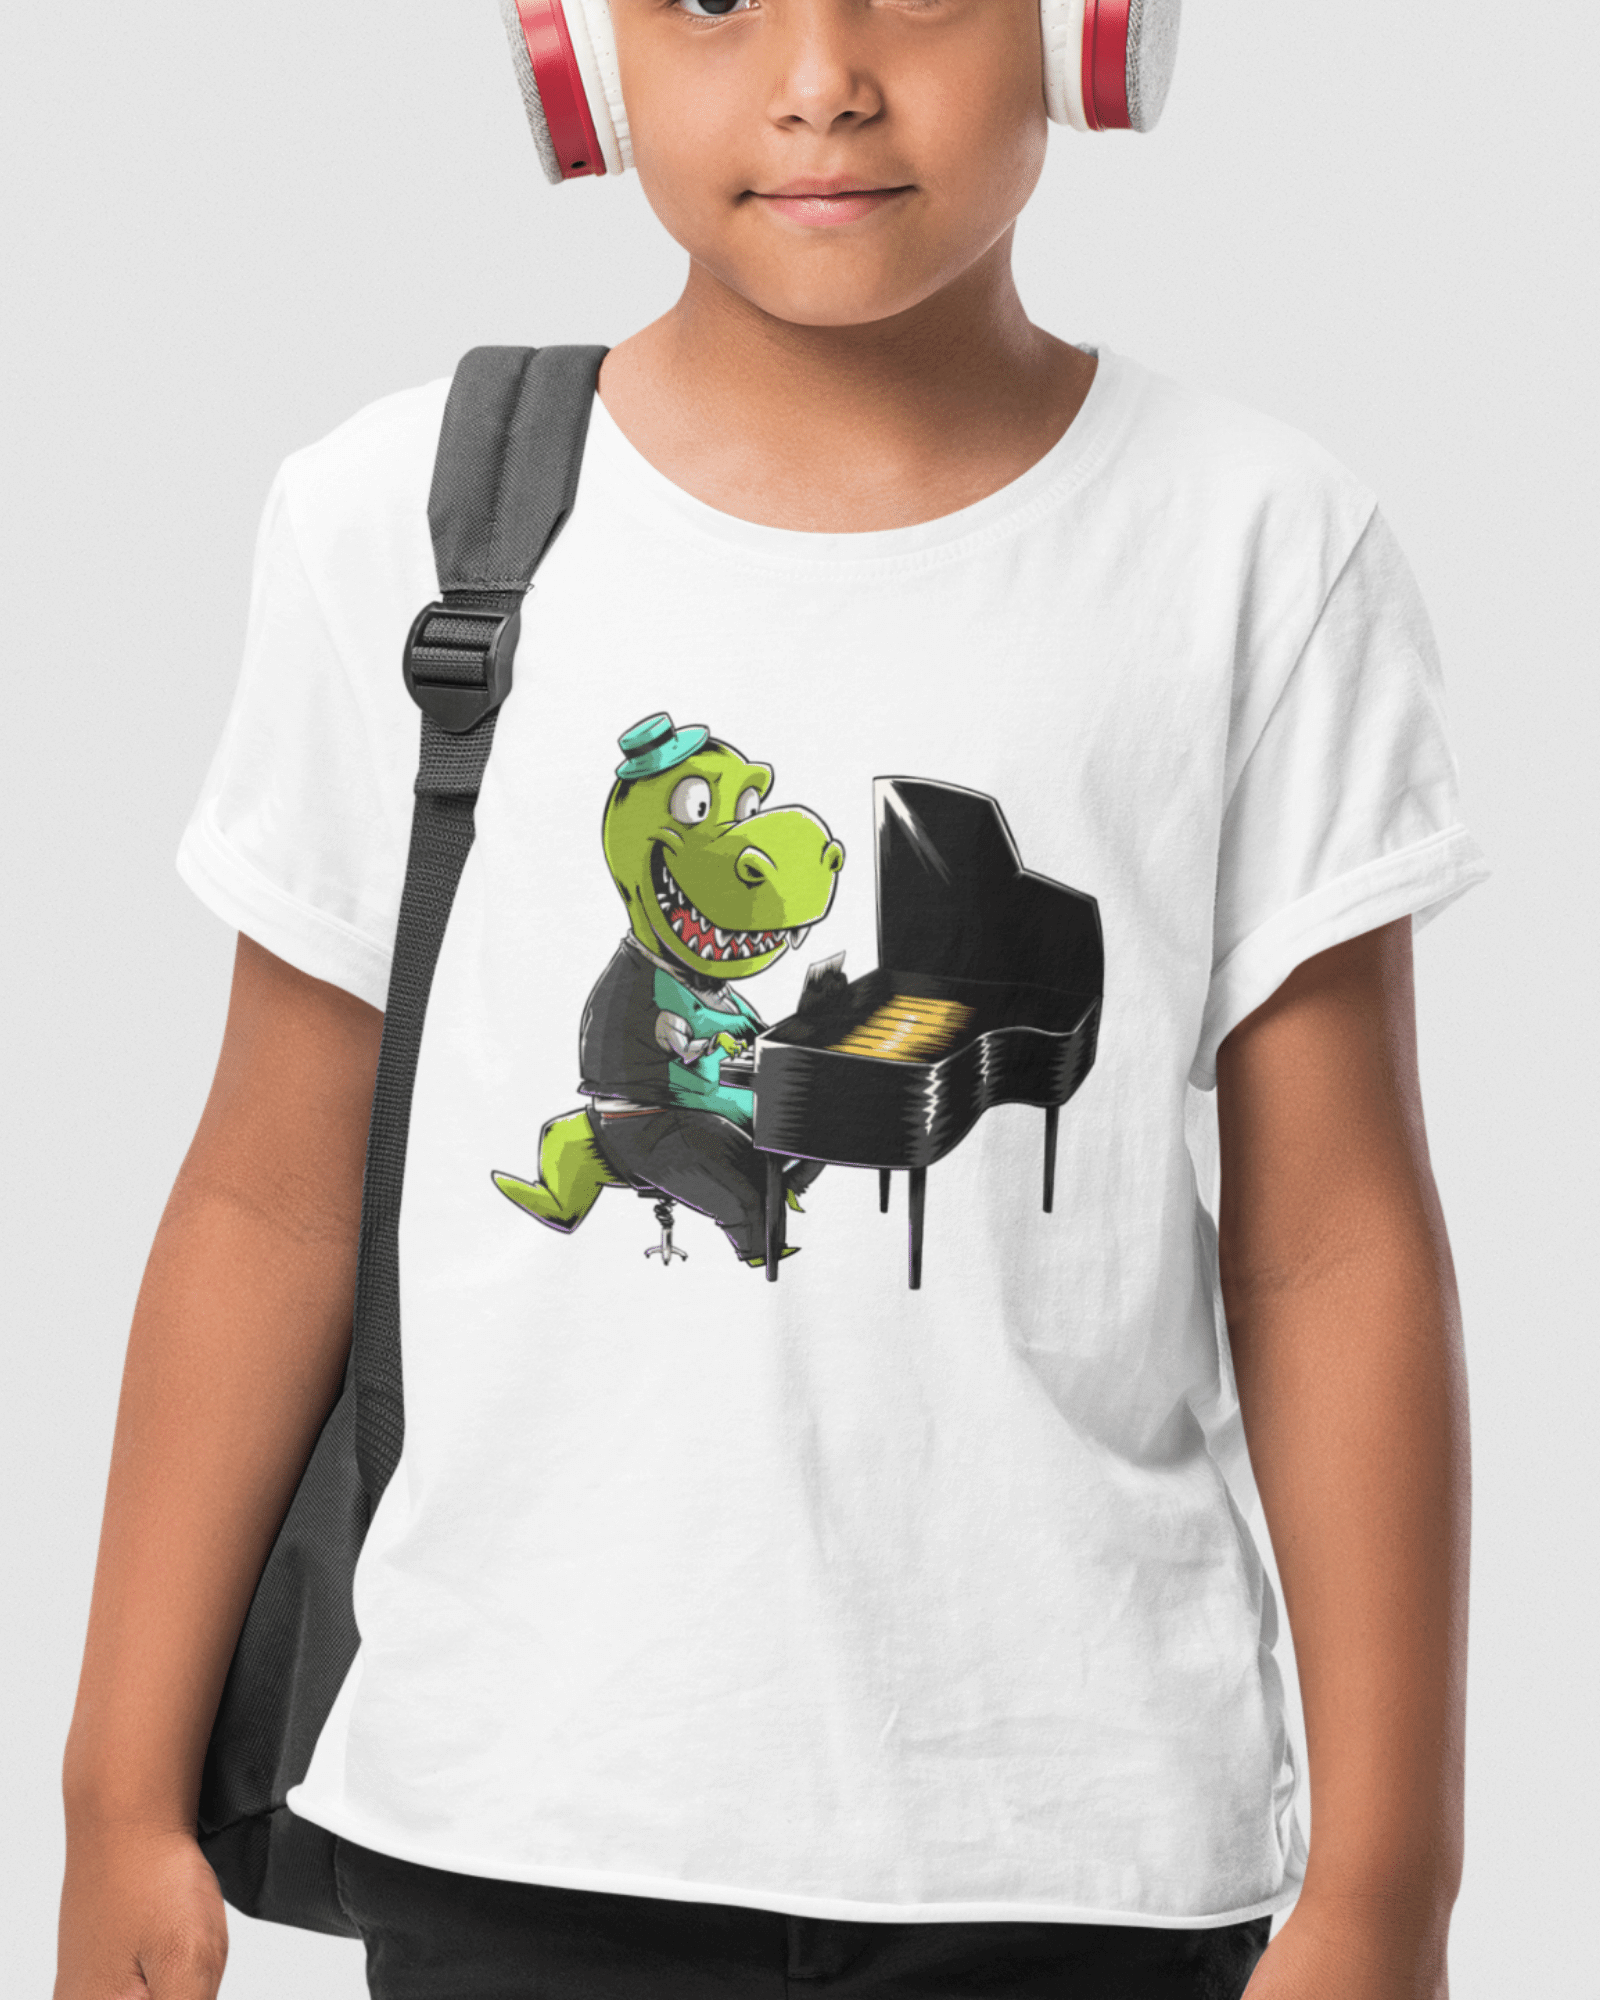 photo shows a boy wearing a shirt with a pianlo playing dinosaur